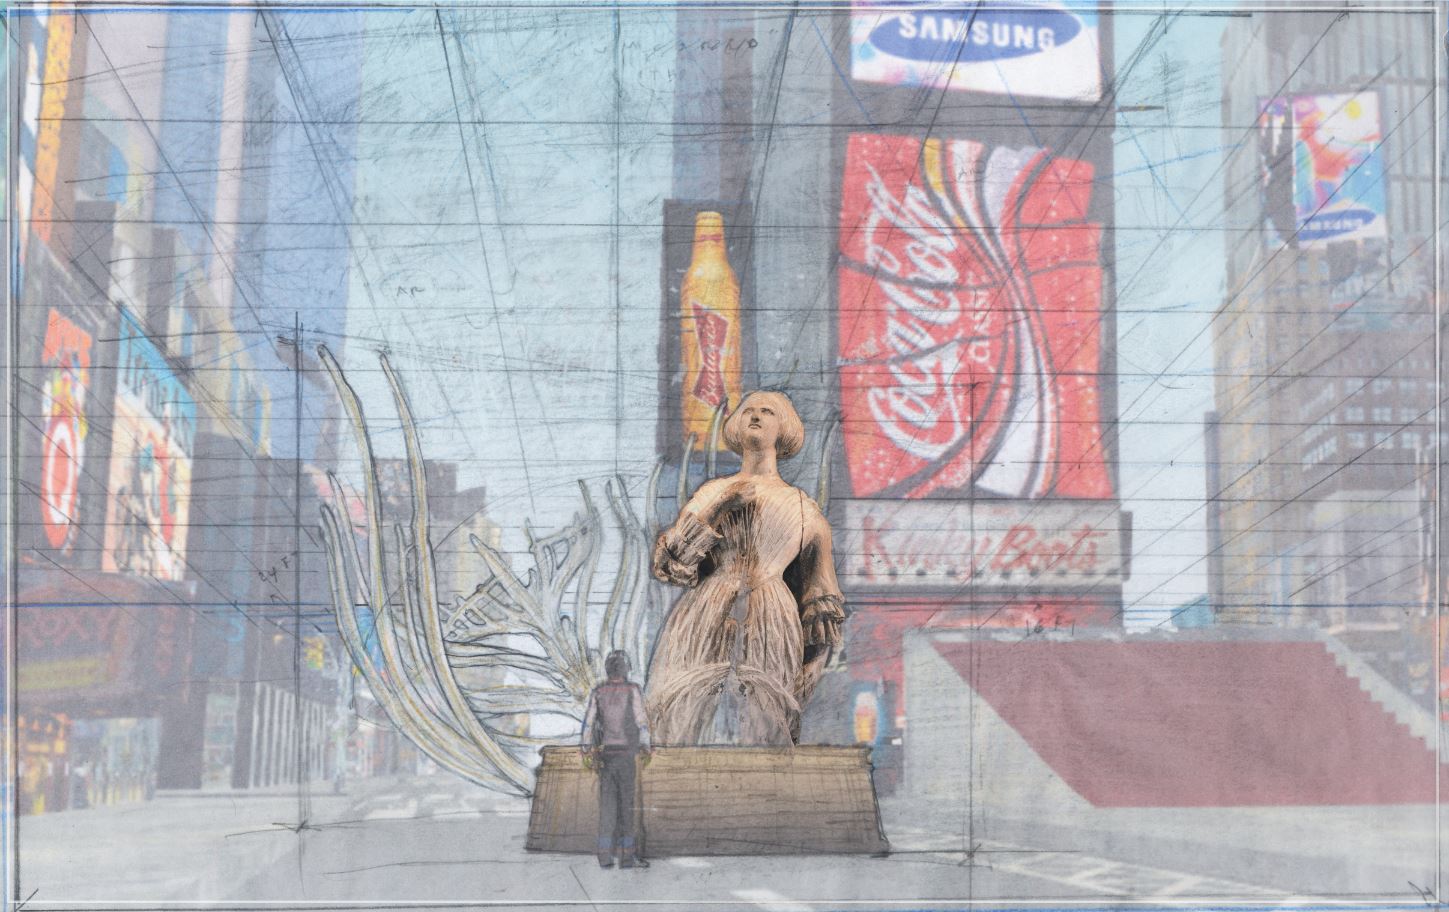 A to scale mock up of a sculpture installation in Times Square. Transparent paper has been laid over a color photograph of Times Square and gridded lines have been draw on in pencil to perfect the scale of a sculpture. The sculpture is of a woman dressed in 19th century style clothing. In front of the sculpture is a sketch of a man view the public art.